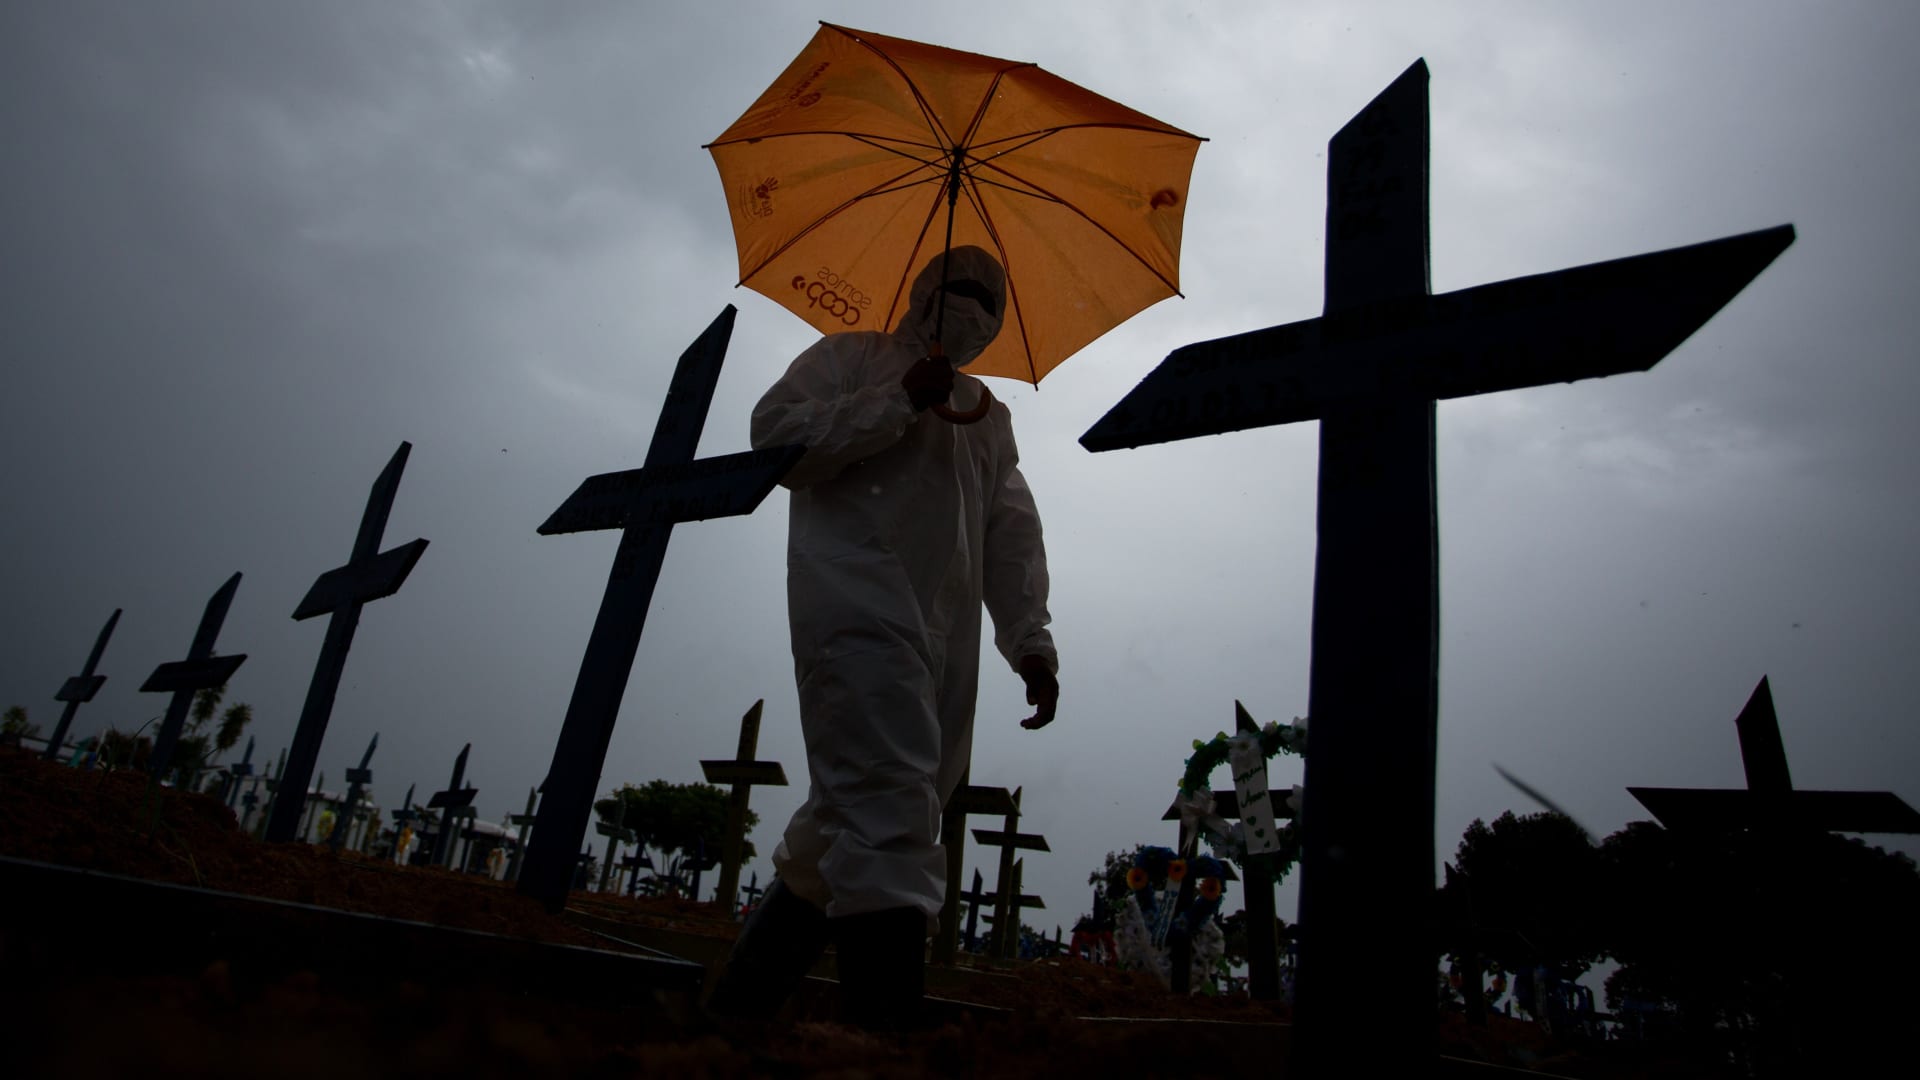 A worker wearing a protective suit and carrying an umbrella walks past the graves of COVID-19 victims at the Nossa Senhora Aparecida cemetery, in Manaus, Brazil, on February 25, 2021.